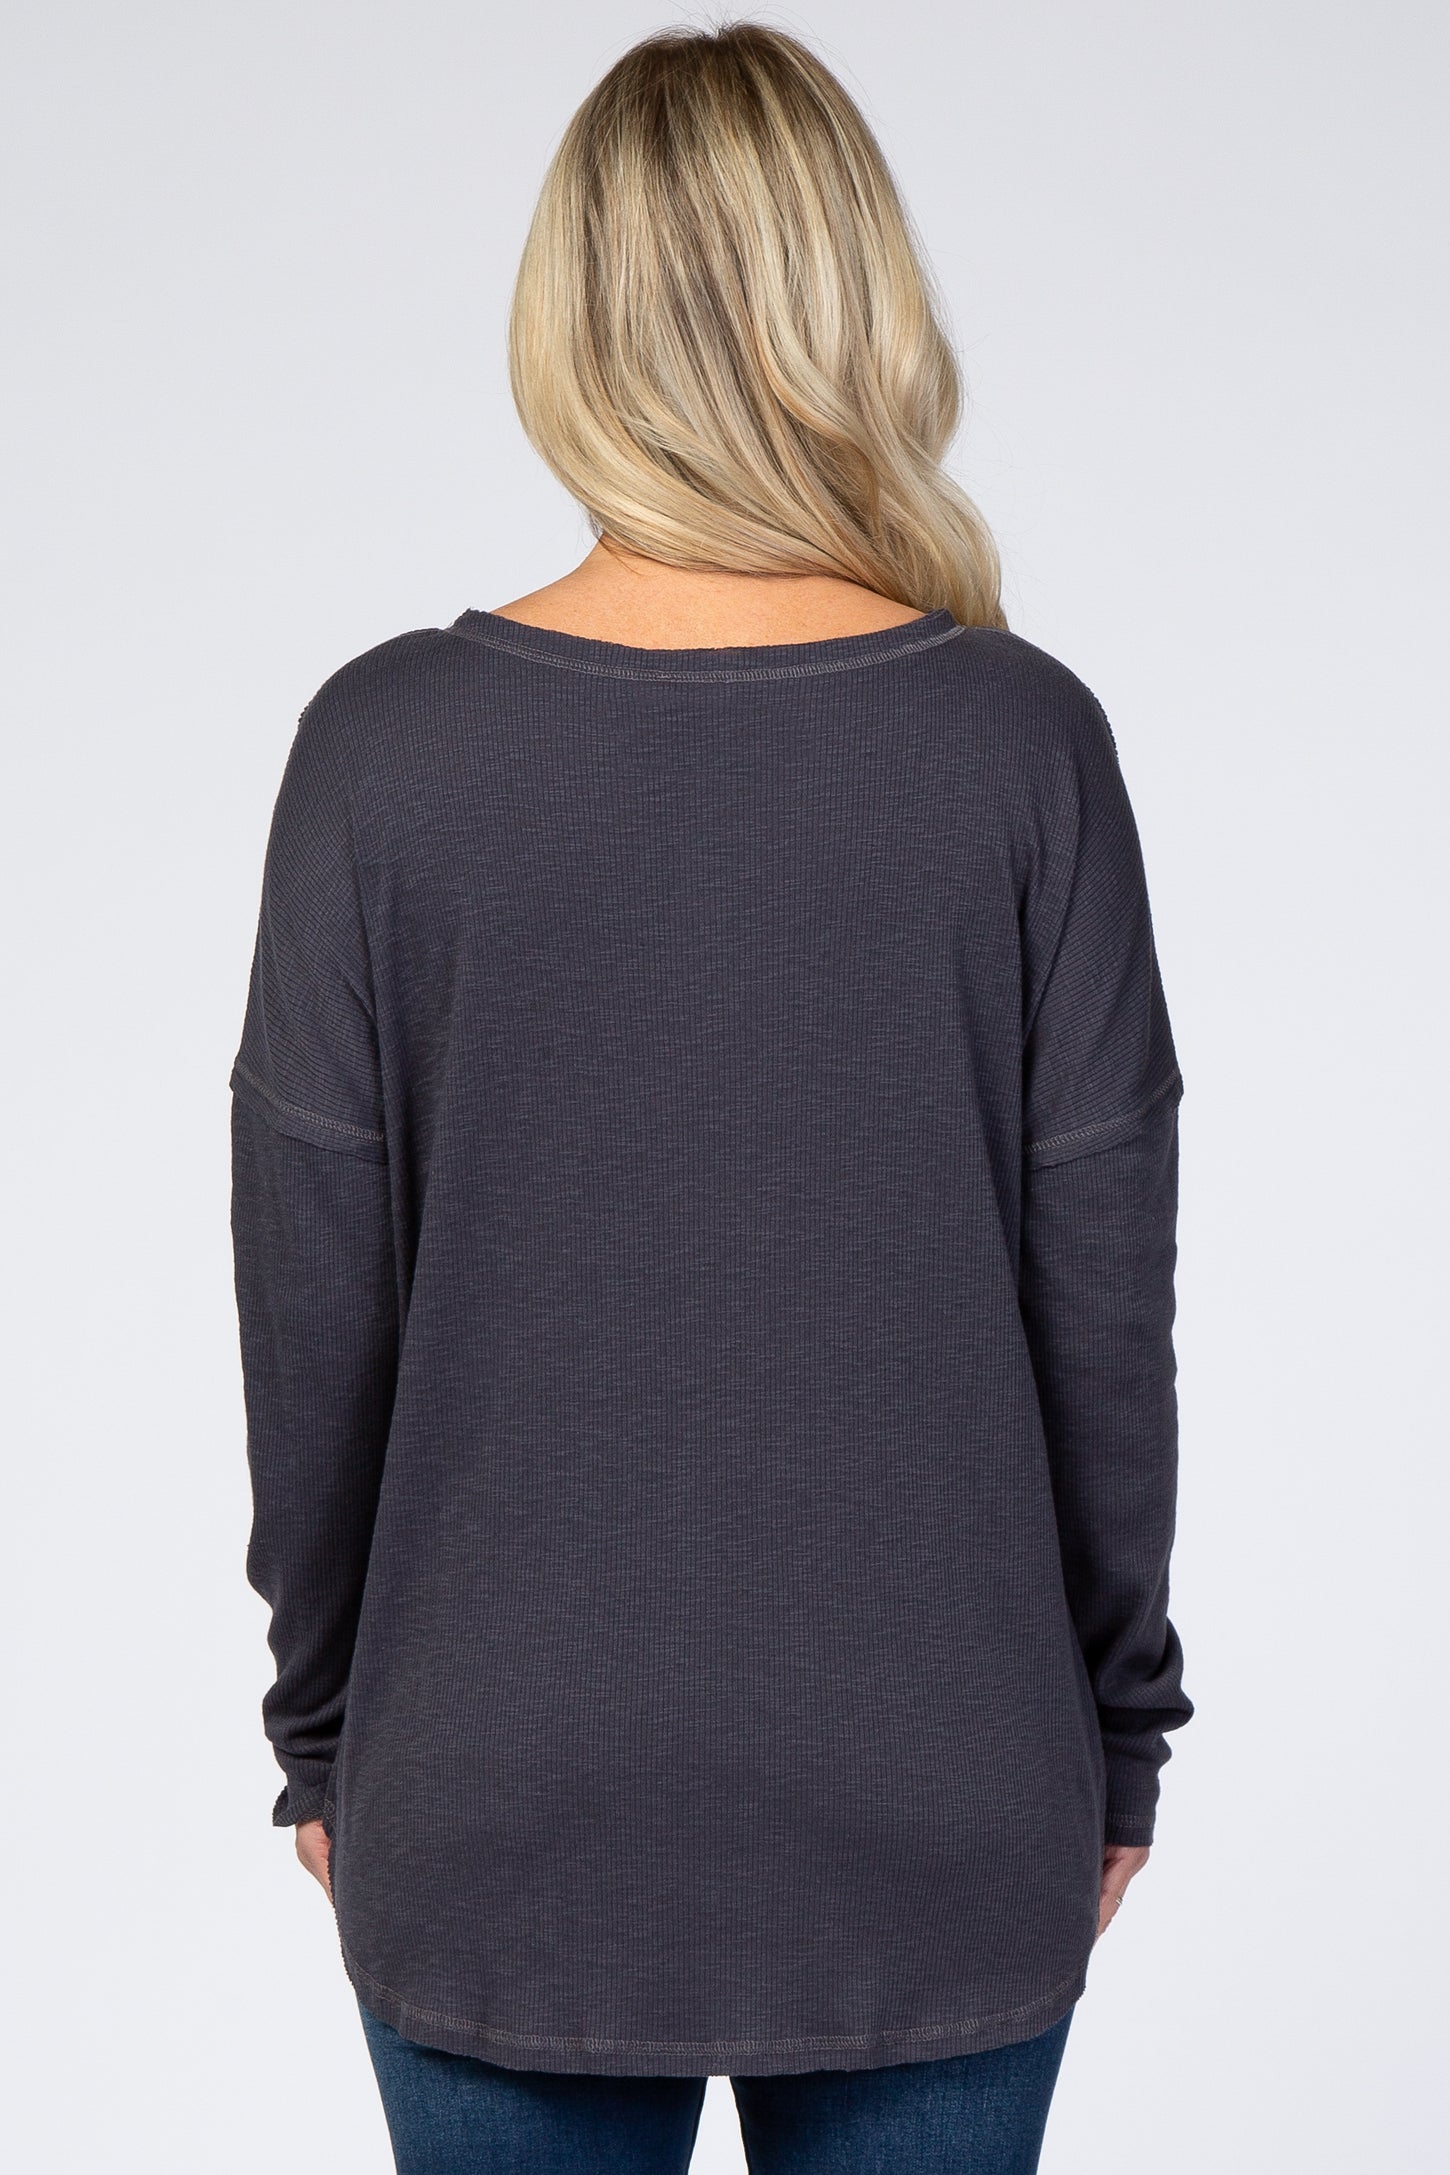 Charcoal Ribbed Button Front Round Hem Maternity Top